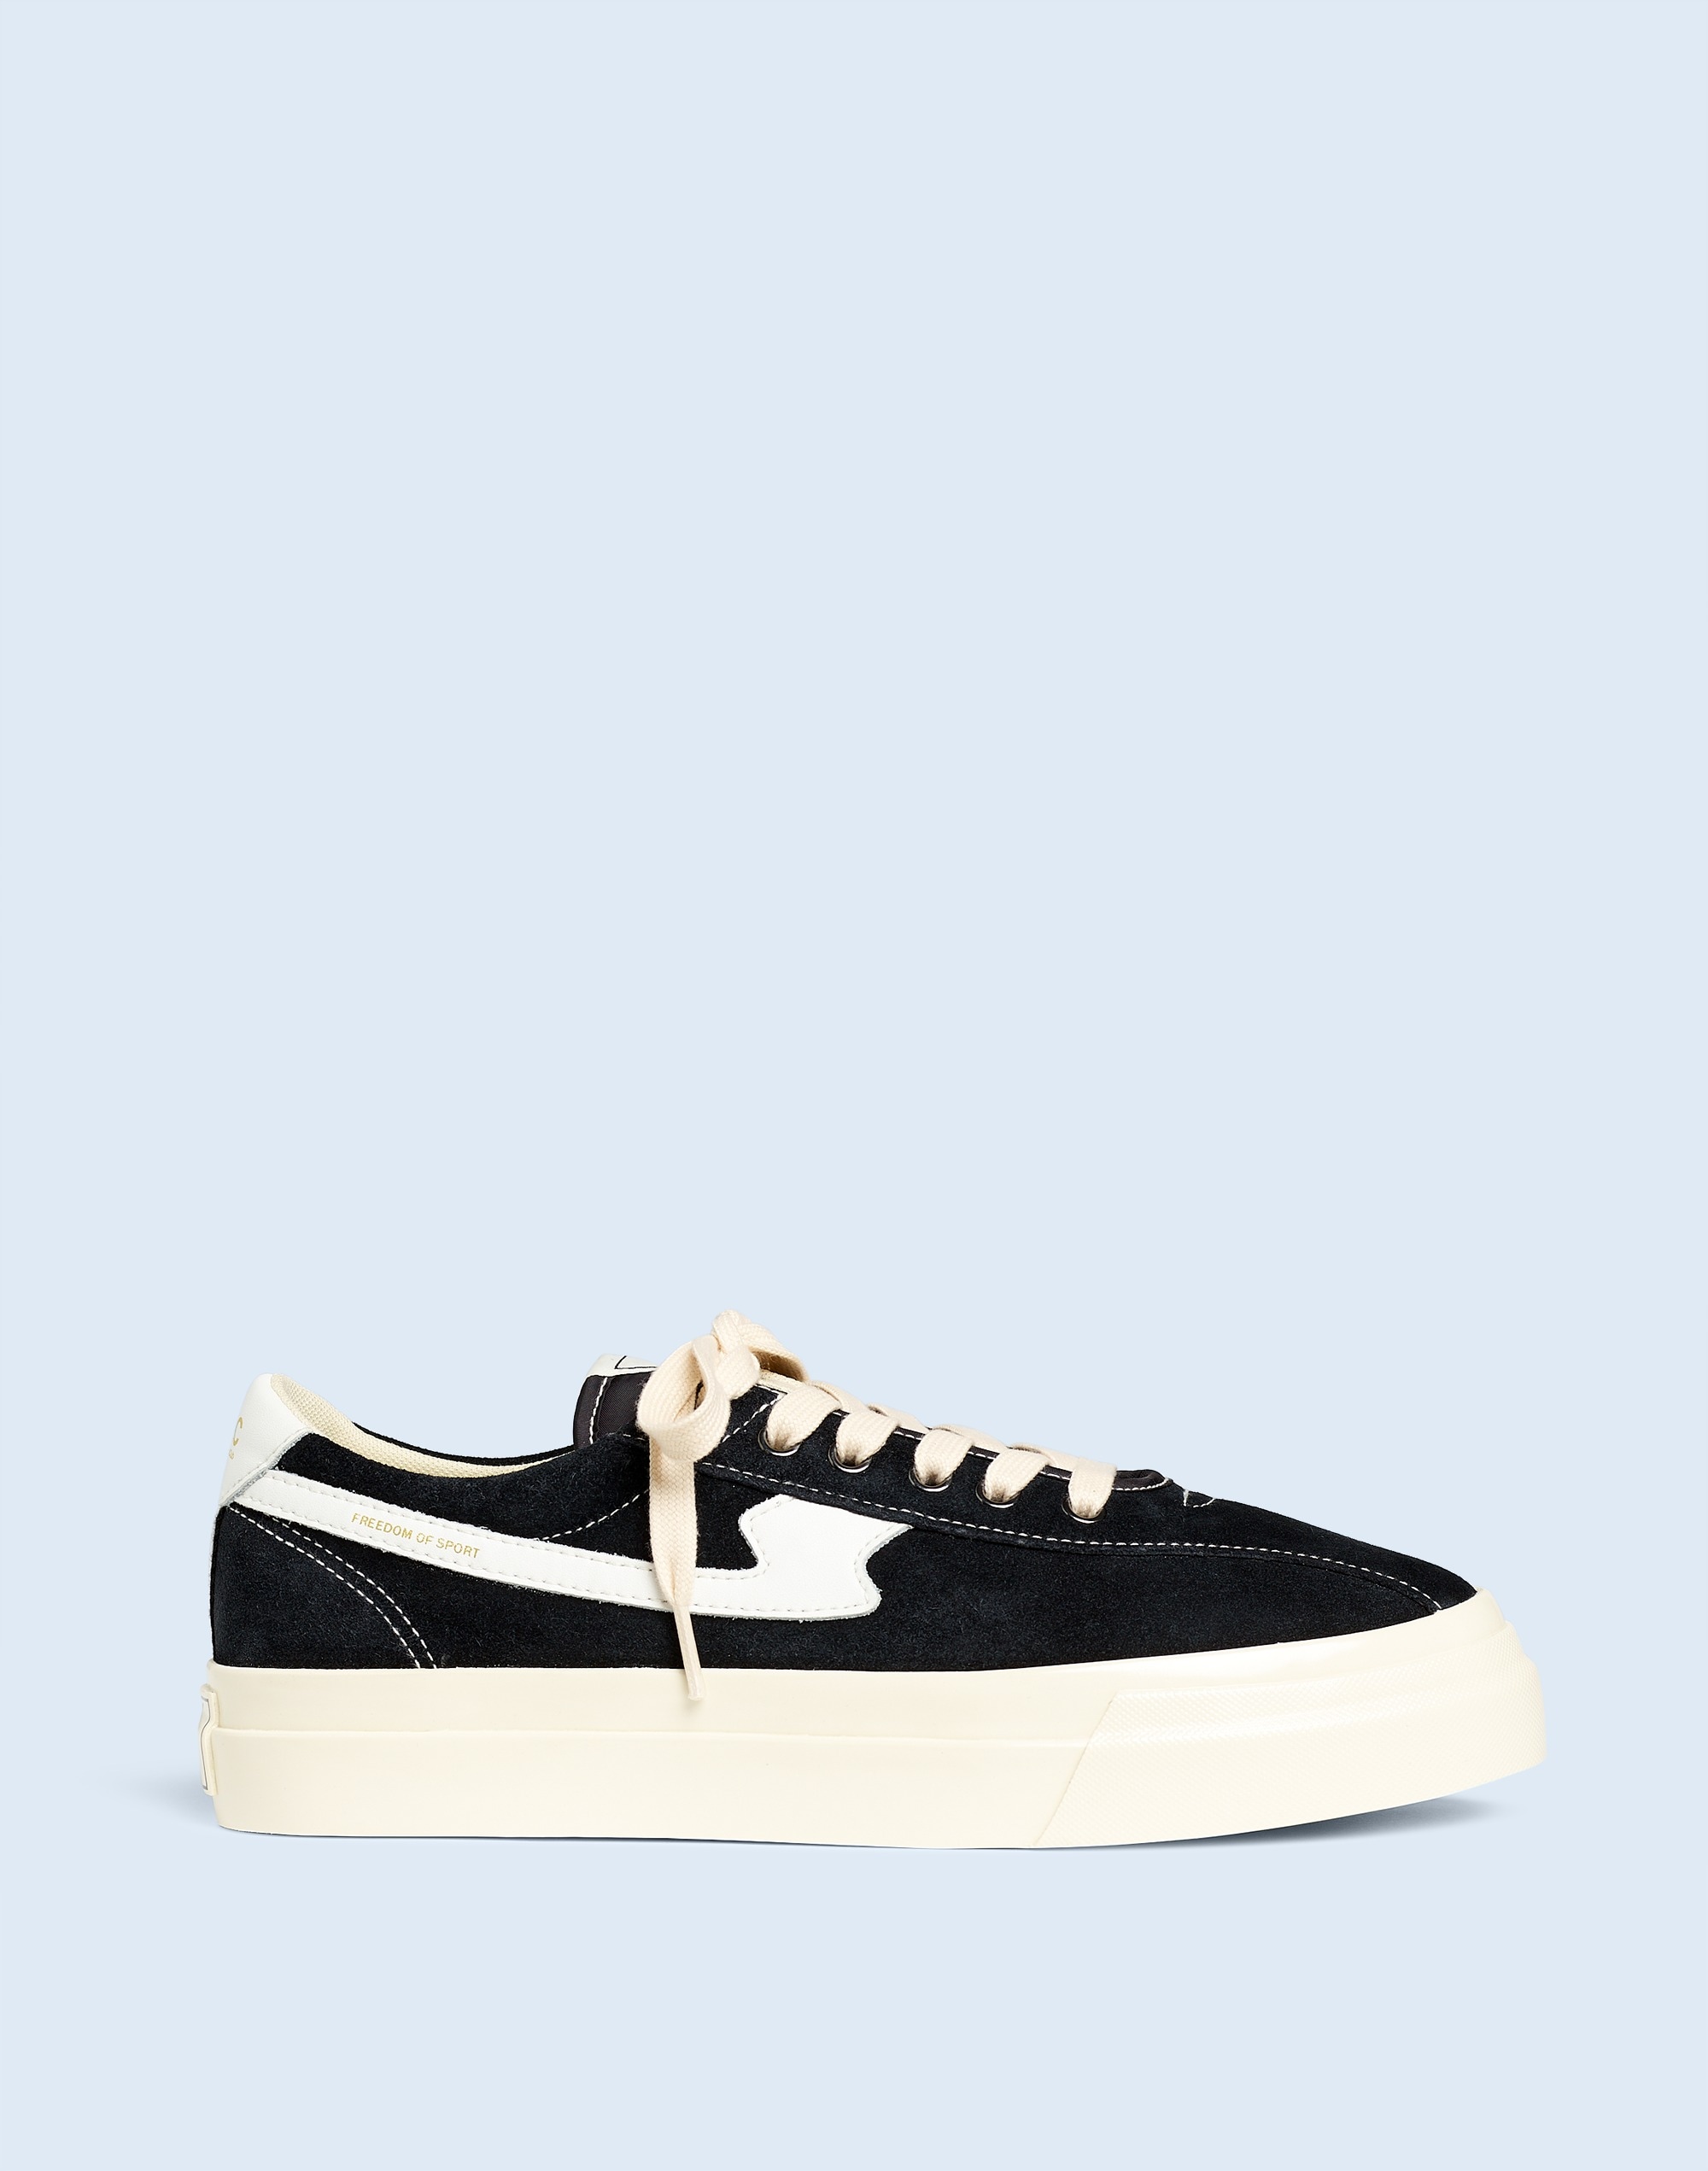 Madewell Stepney Workers Club Dellow S-Strike Sneakers | MarketFair Shoppes